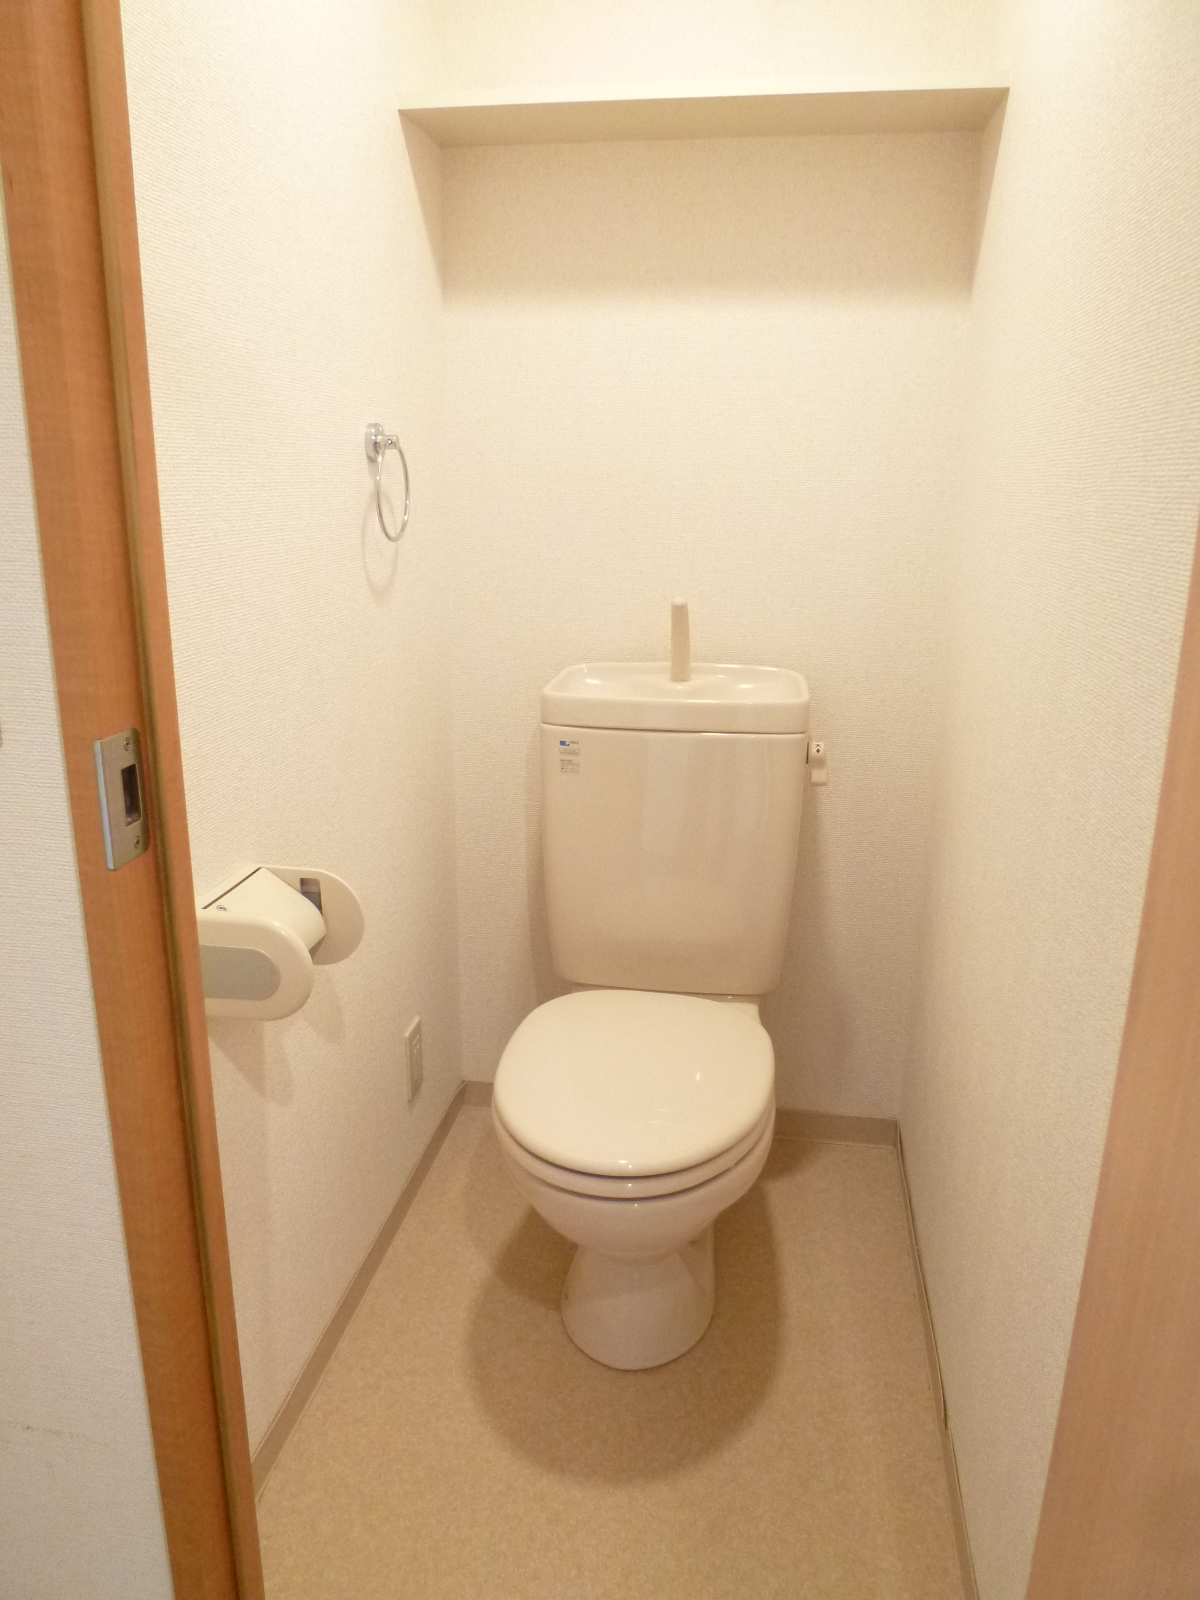 Toilet. It is good that there is a shelf ^^